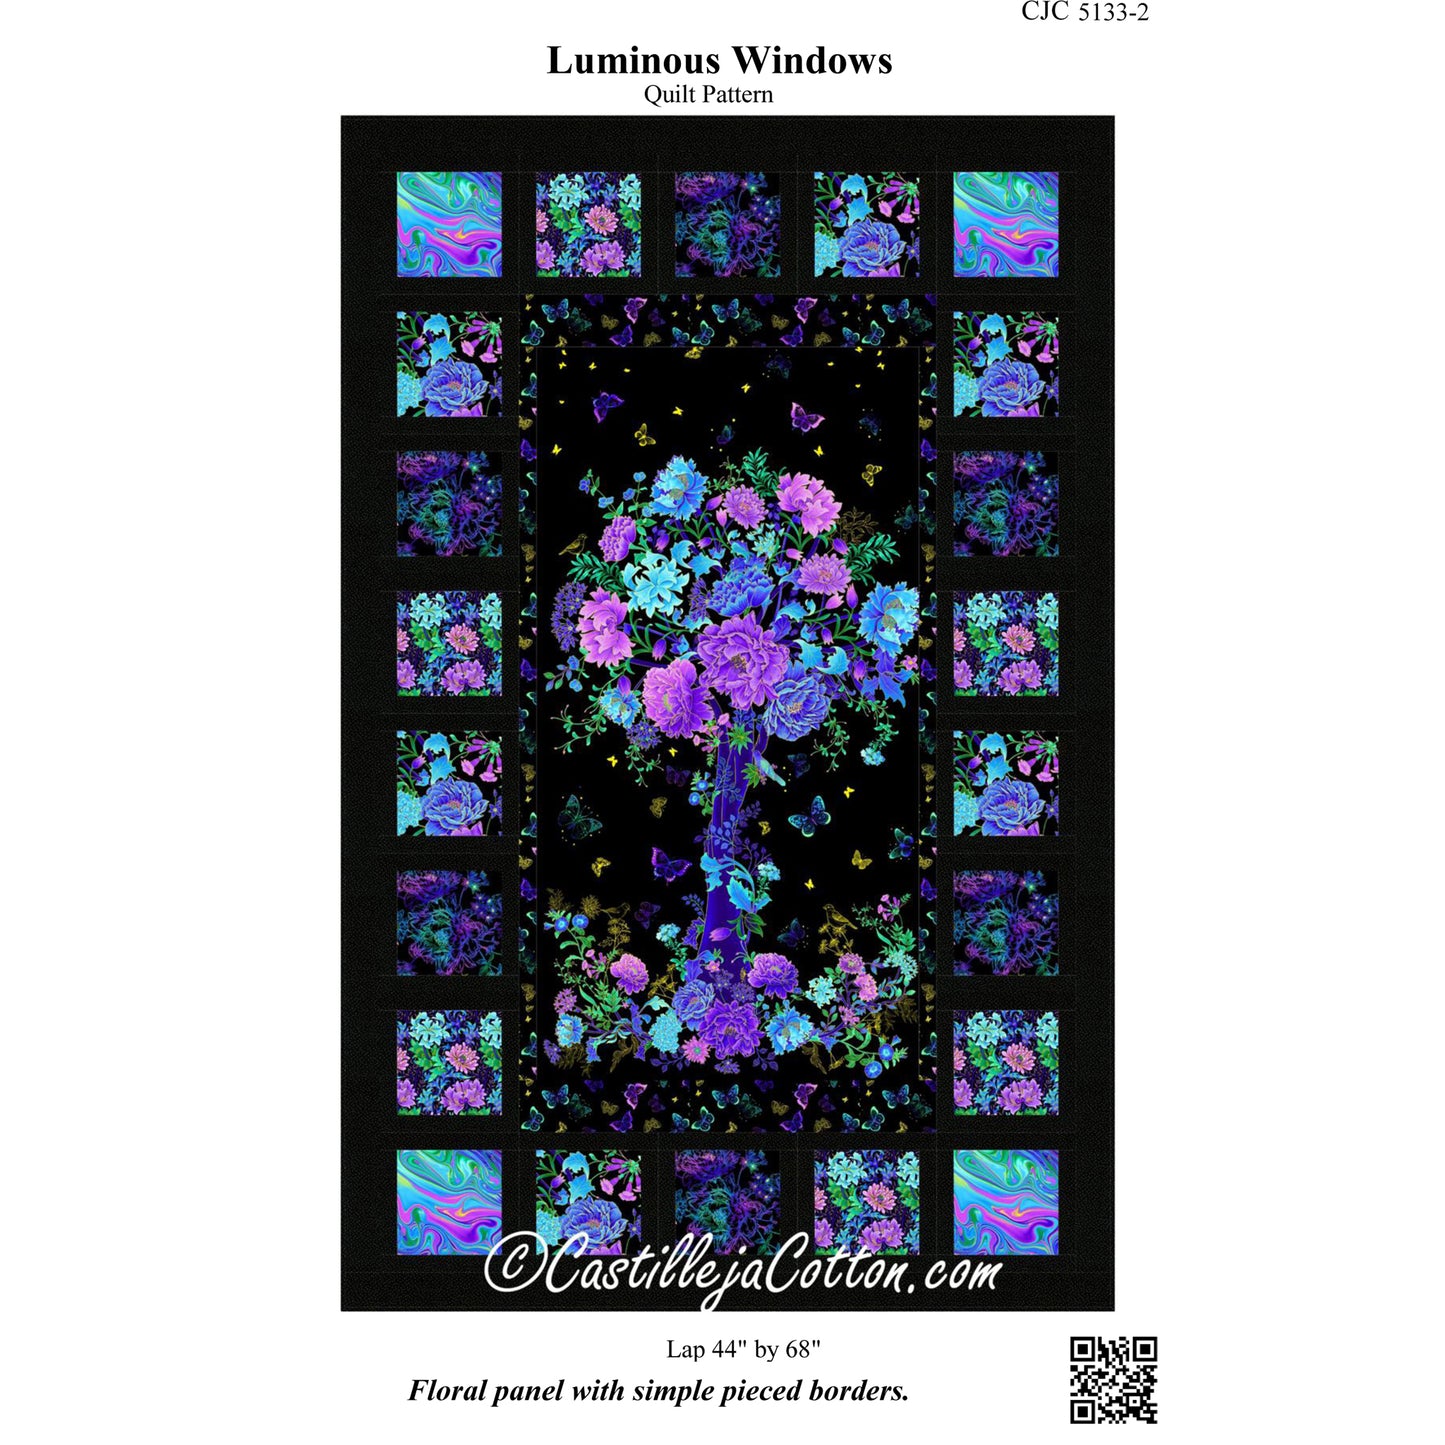 Cover image of pattern for Luminous Windows Quilt.